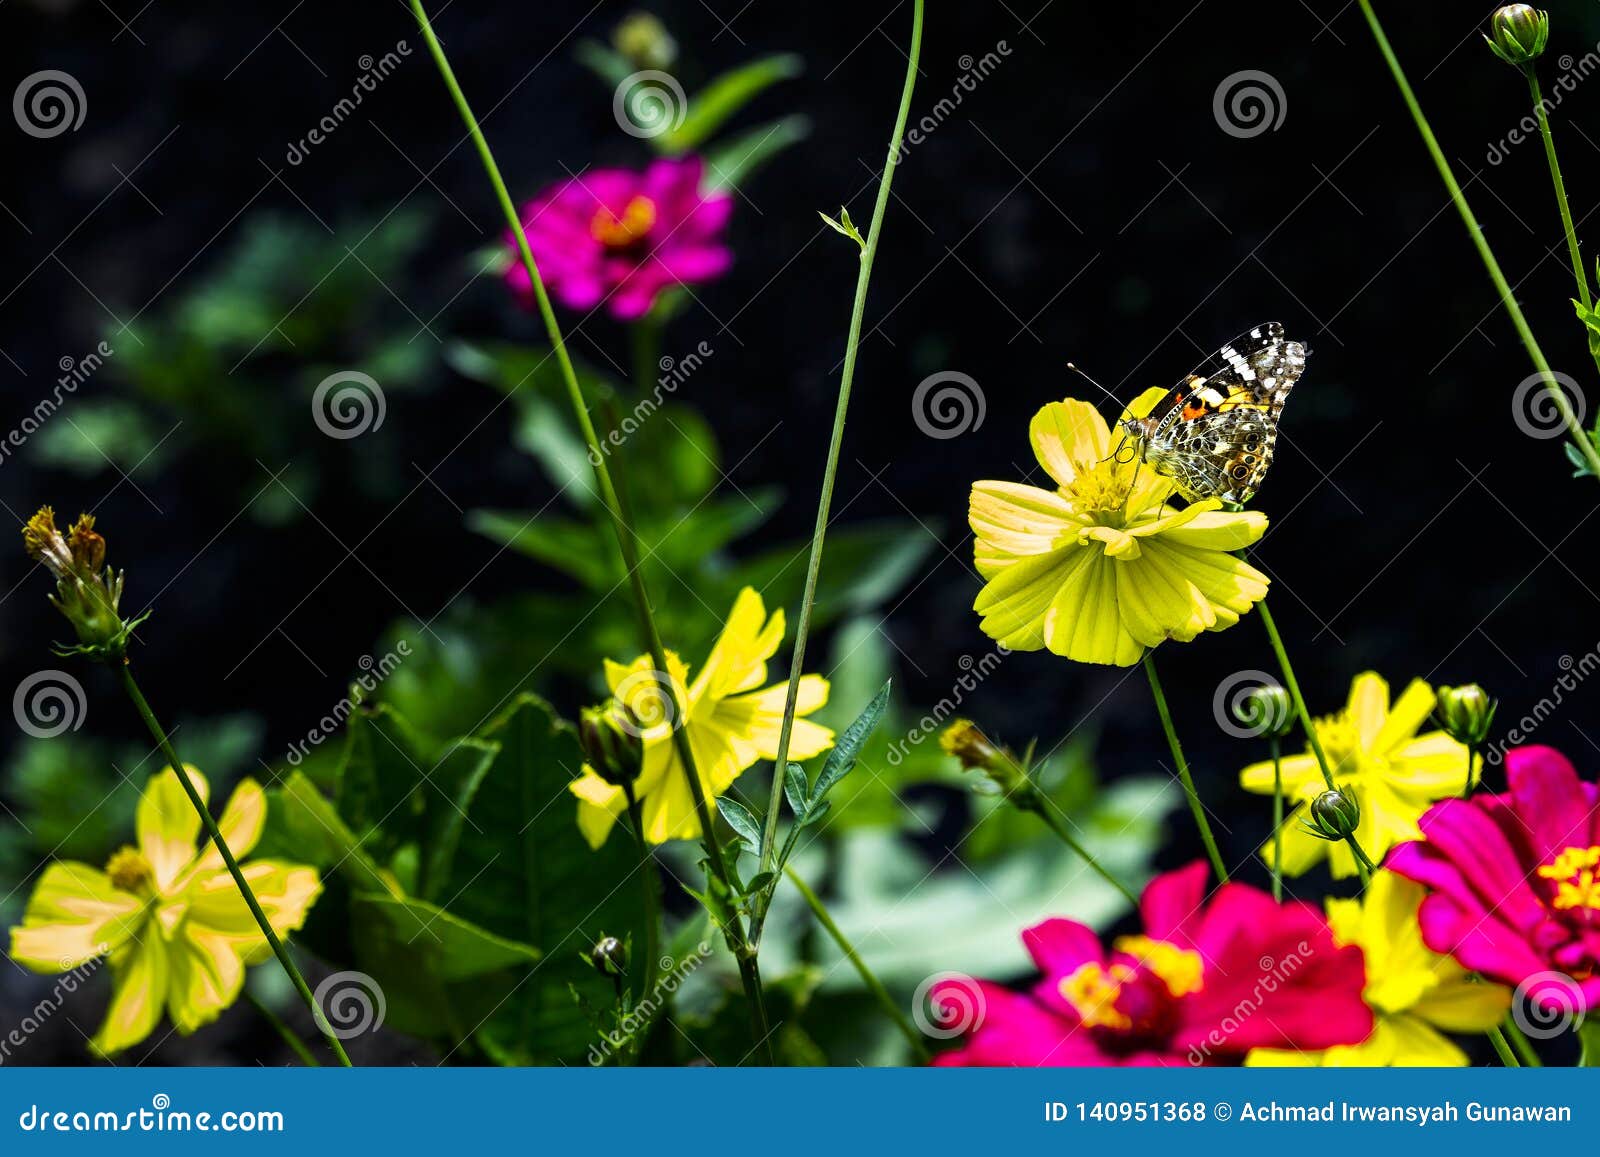 Butterfly Perch On The Yellow Flower In The Garden Stock Photo Image Of Flora Colorful 140951368